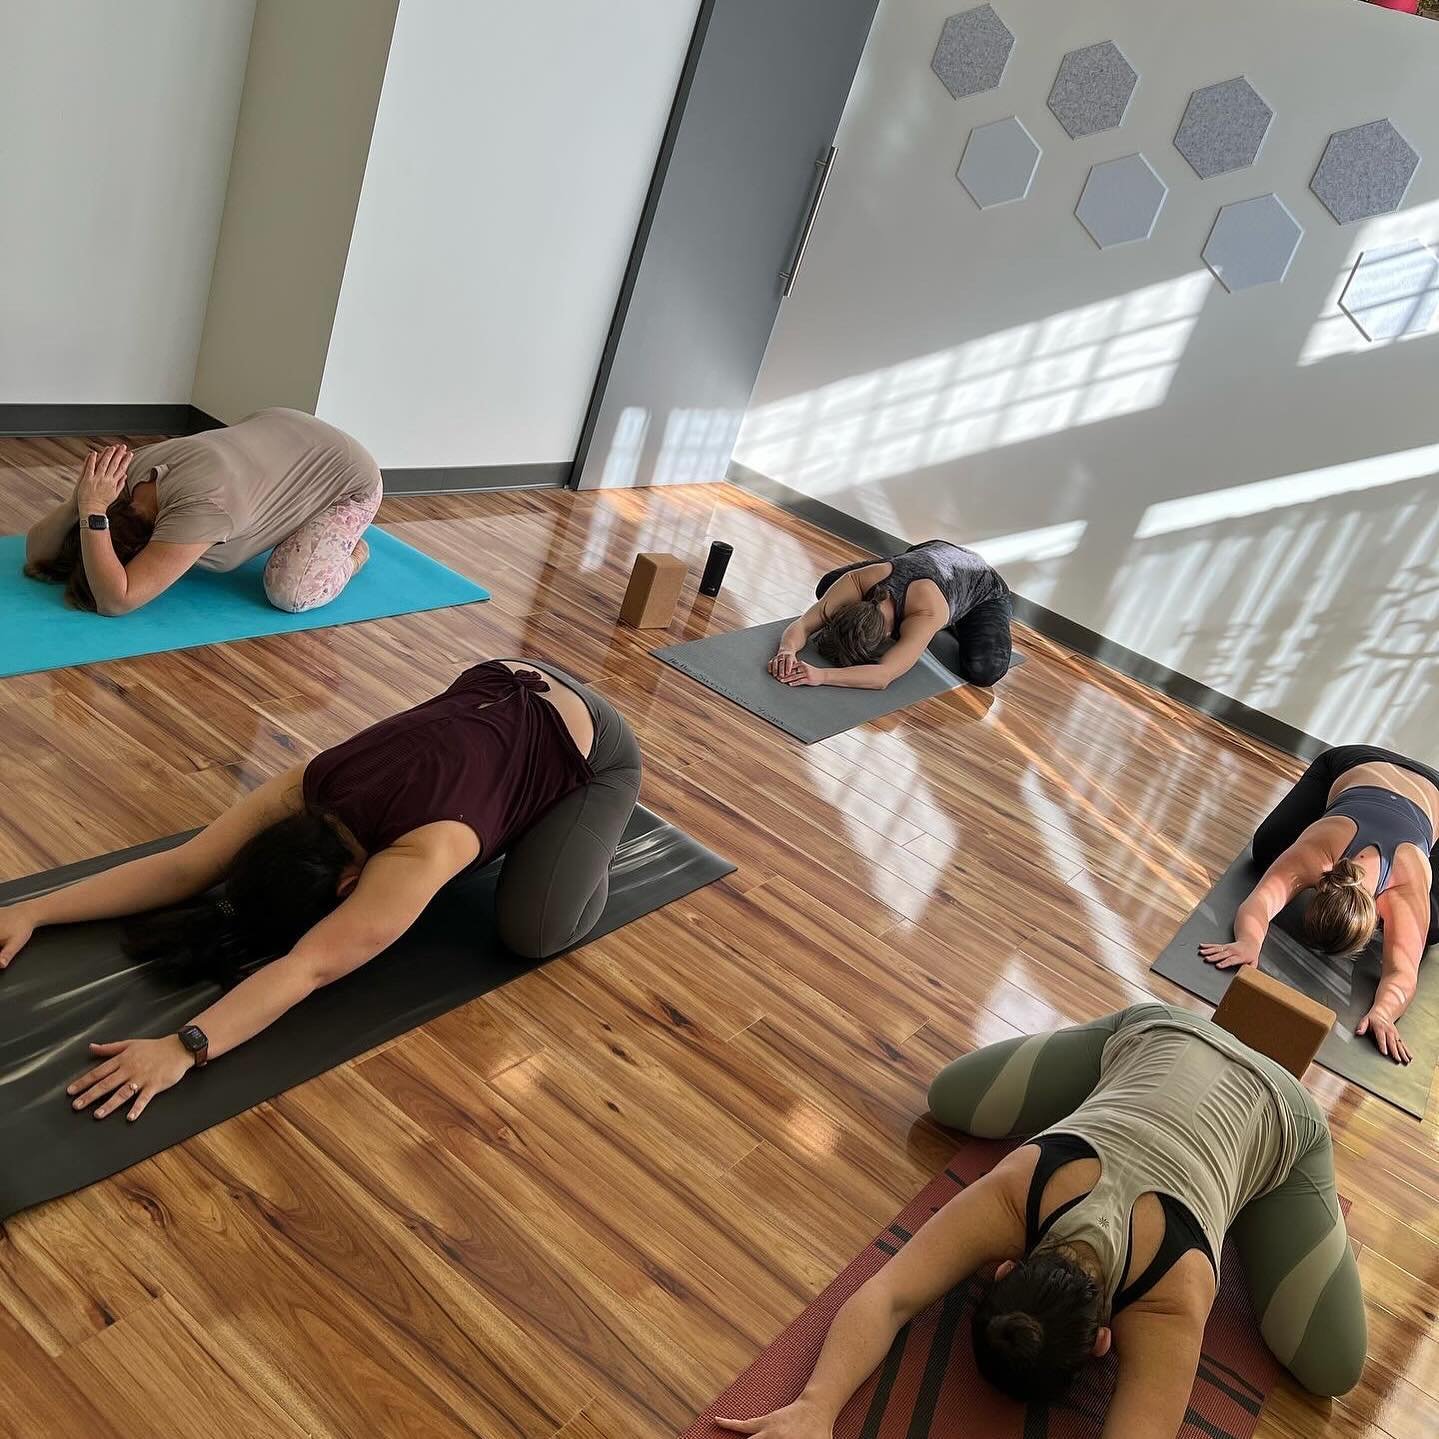 Community Yoga- Fri 6:30pm
$10 for non-members 
End your week with some relaxing stretching and breathing. It&rsquo;s the perfect Friday night treat. 

#yoga #hellosunshineyoga #cincinnatiyoga